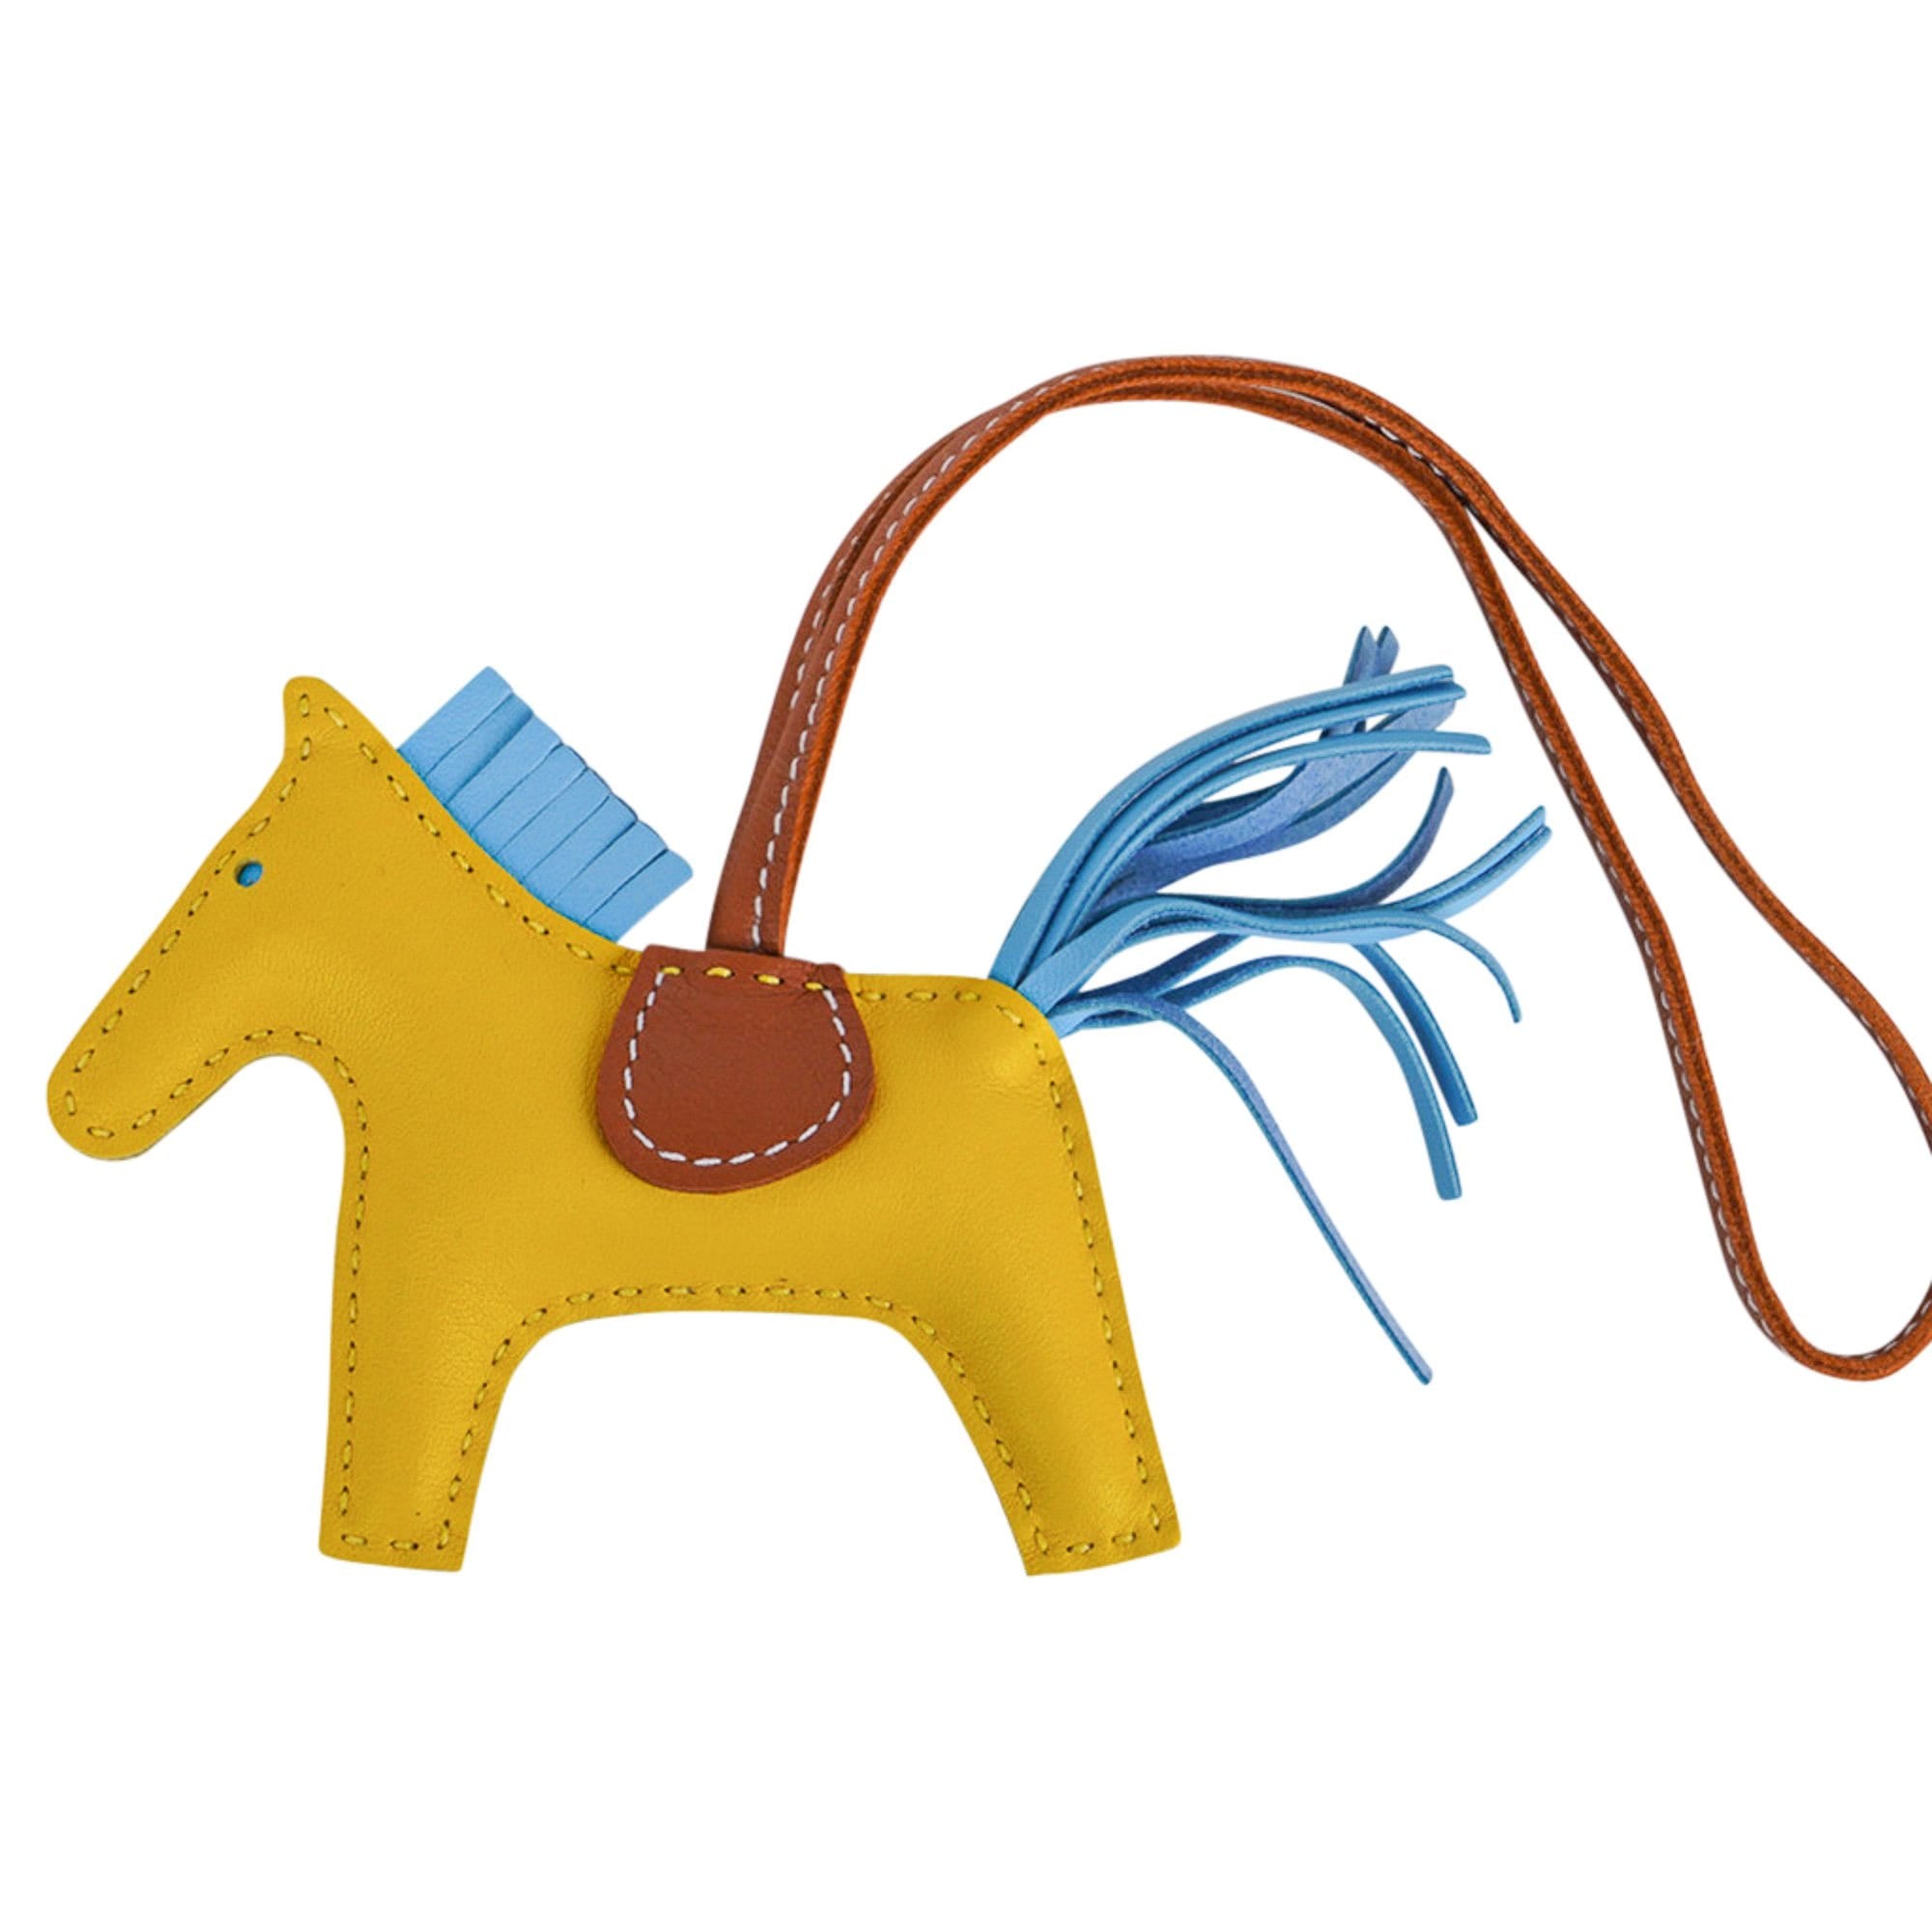 Hermes, Accessories, Hermes Rodeo Pm Bag Charm